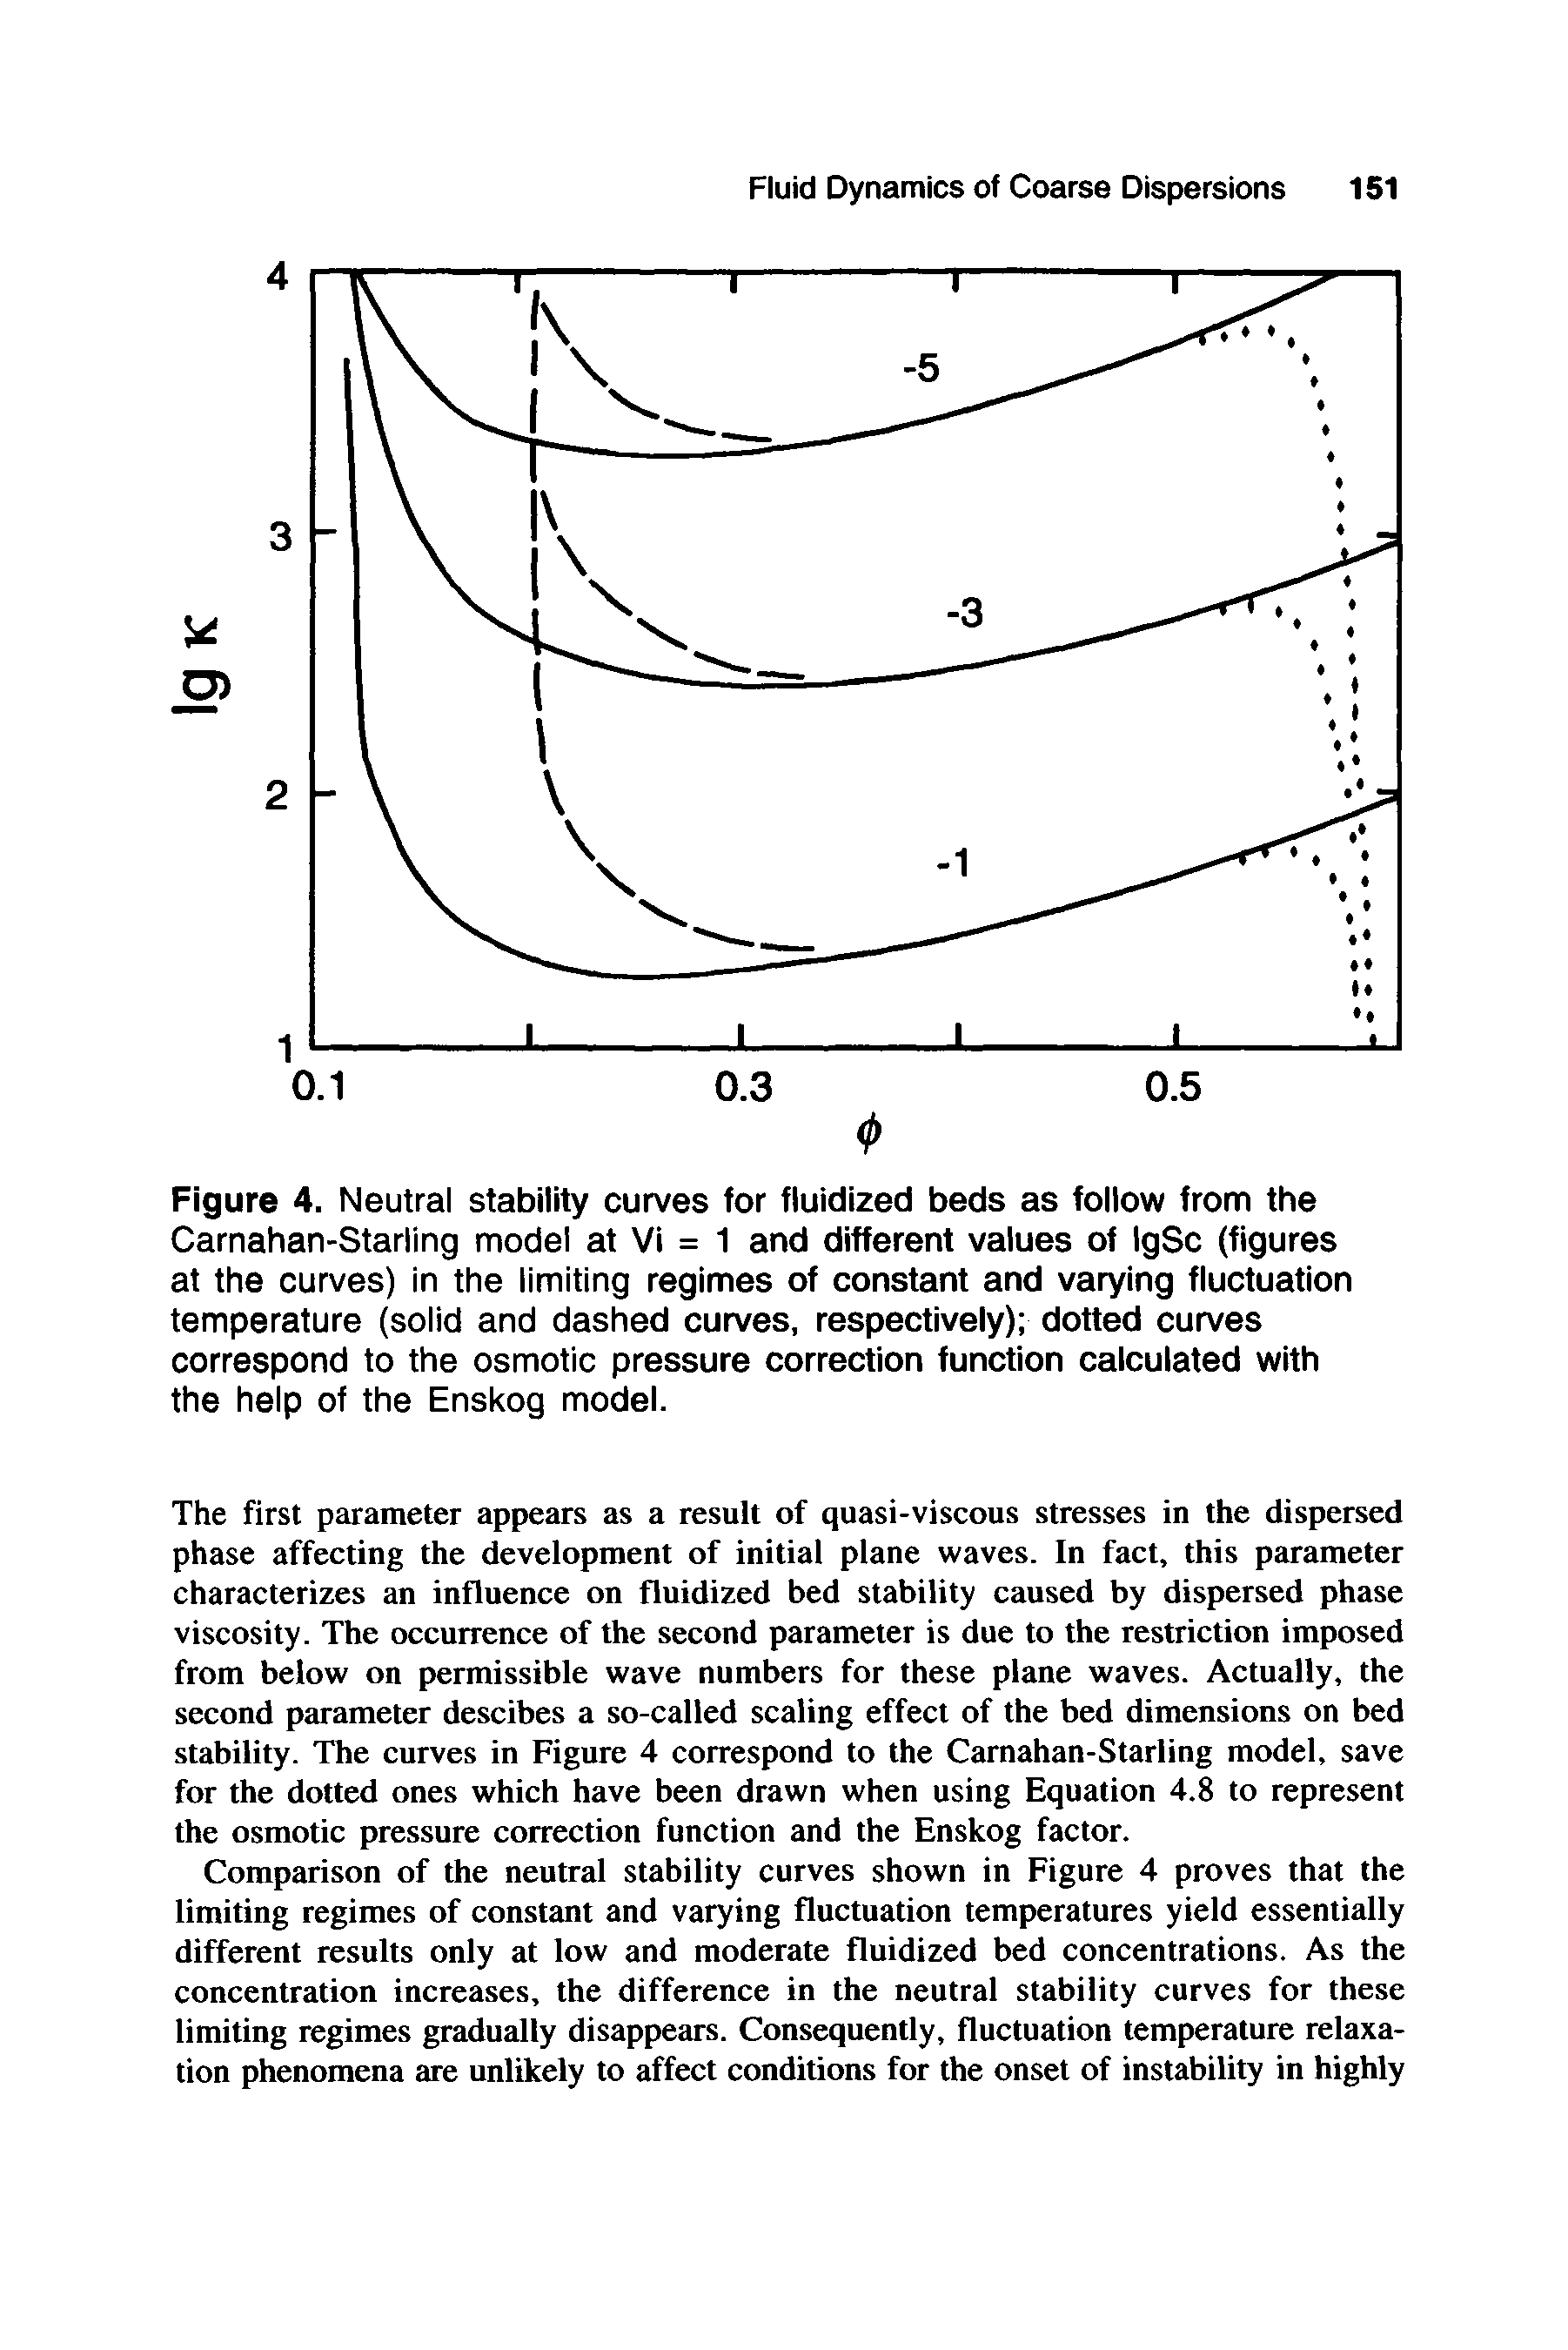 Figure 4. Neutral stability curves for fluidized beds as foilow from the Carnahan-Starling model at Vi = 1 and different values of IgSc (figures at the curves) in the limiting regimes of constant and varying fiuctuation temperature (solid and dashed curves, respectively) dotted curves correspond to the osmotic pressure correction function calculated with the help of the Enskog model.